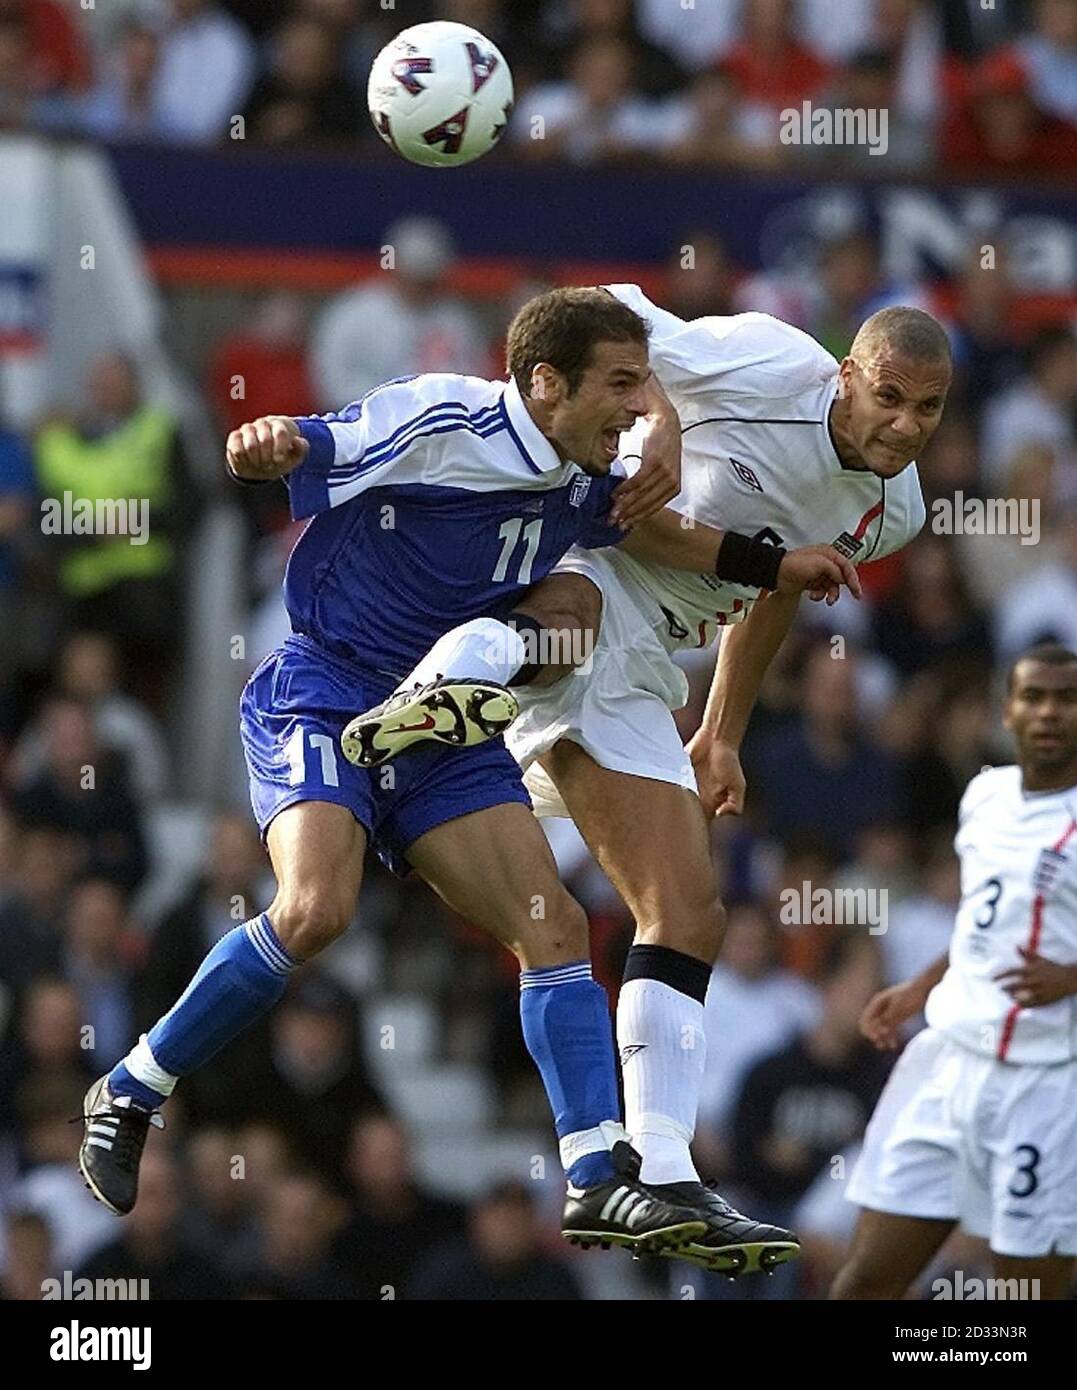 England's Rio Ferdinand battles for the ball against Themis Nikolaidis (left) of Greece during the FIFA World Cup European Qualifying Group Nine match at Old Trafford, Manchester.   eg Stock Photo